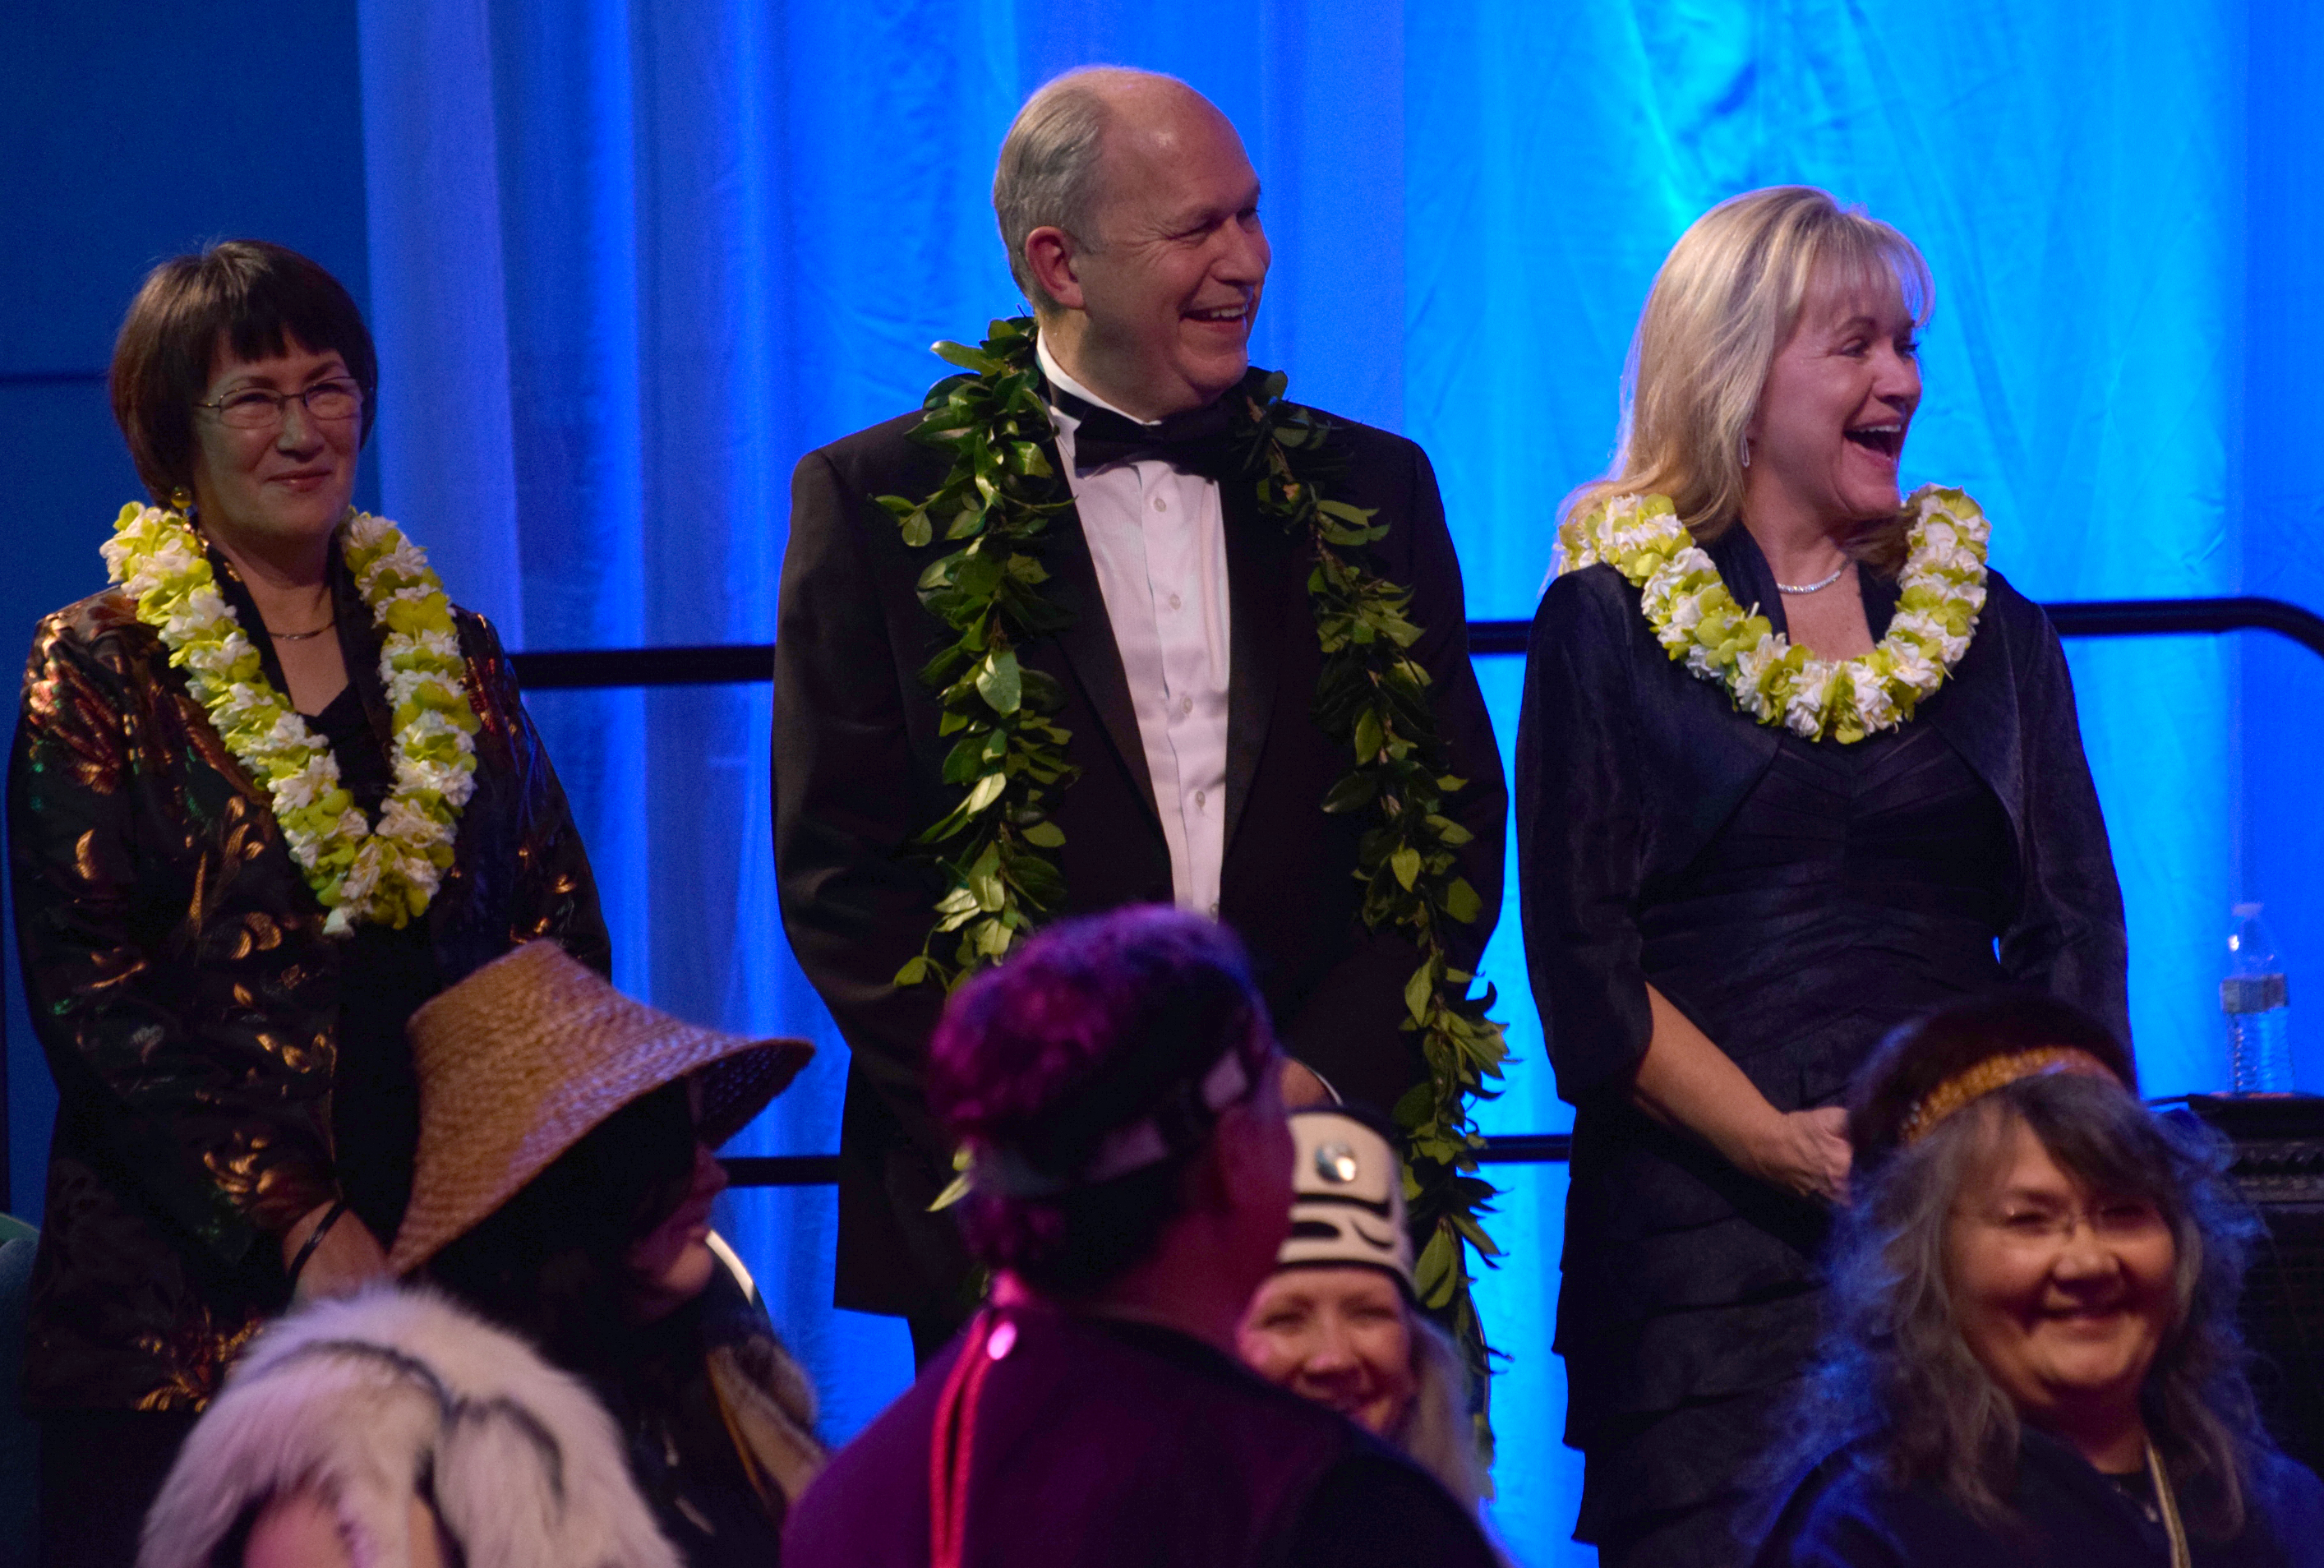 Toni Mallott, Gov. Bill Walker and First Lady Donna Walker on stage during the Inaugural Gala. (Photo by Skip Gray/KTOO)